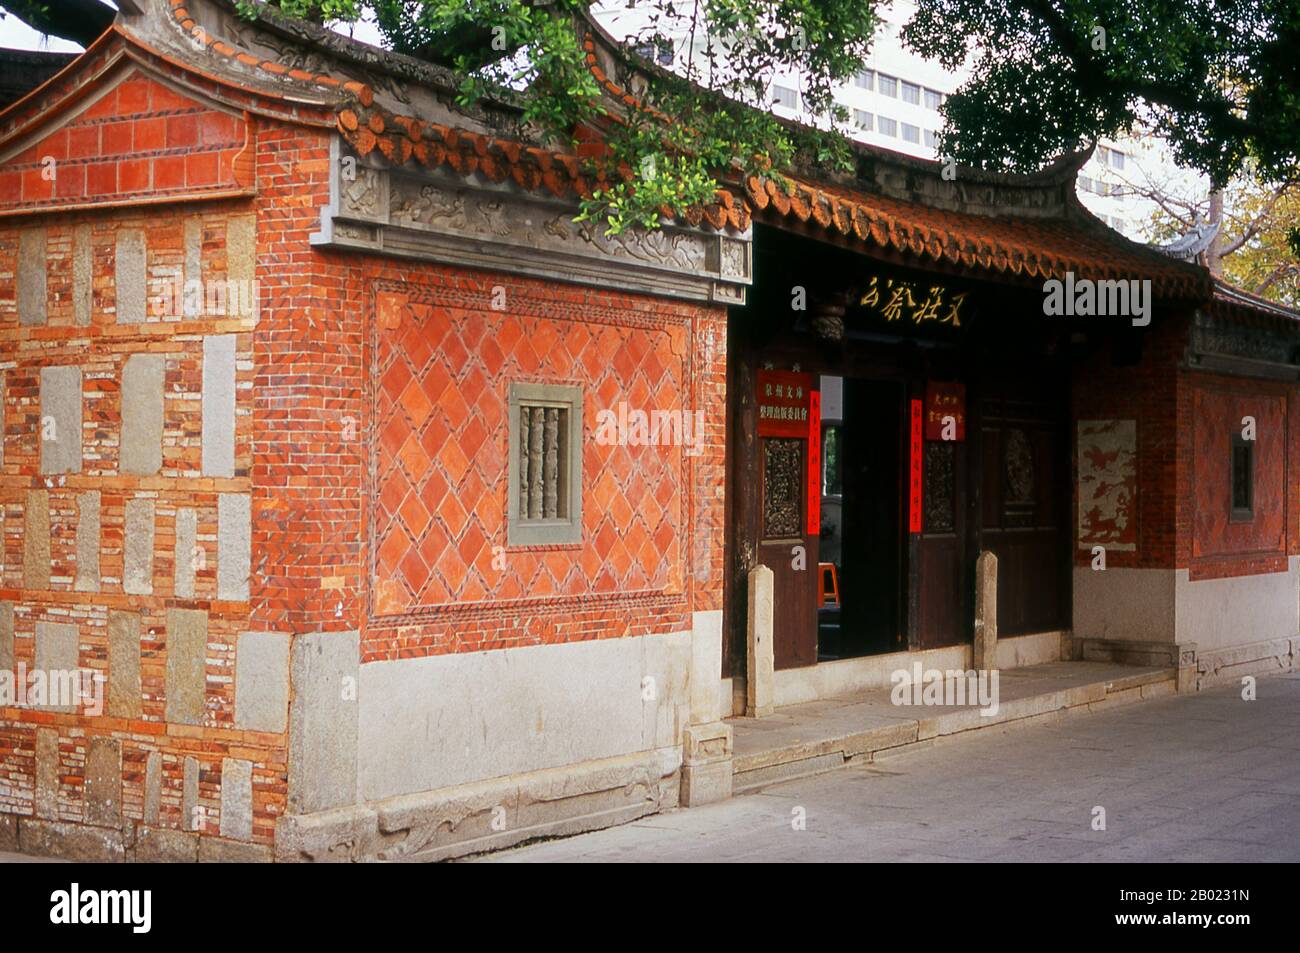 Quanzhou was established in 718 during the Tang Dynasty (618–907). In those  days, Guangzhou was China's greatest seaport, but this status would be  surpassed later by Quanzhou. During the Song Dynasty (960–1279)